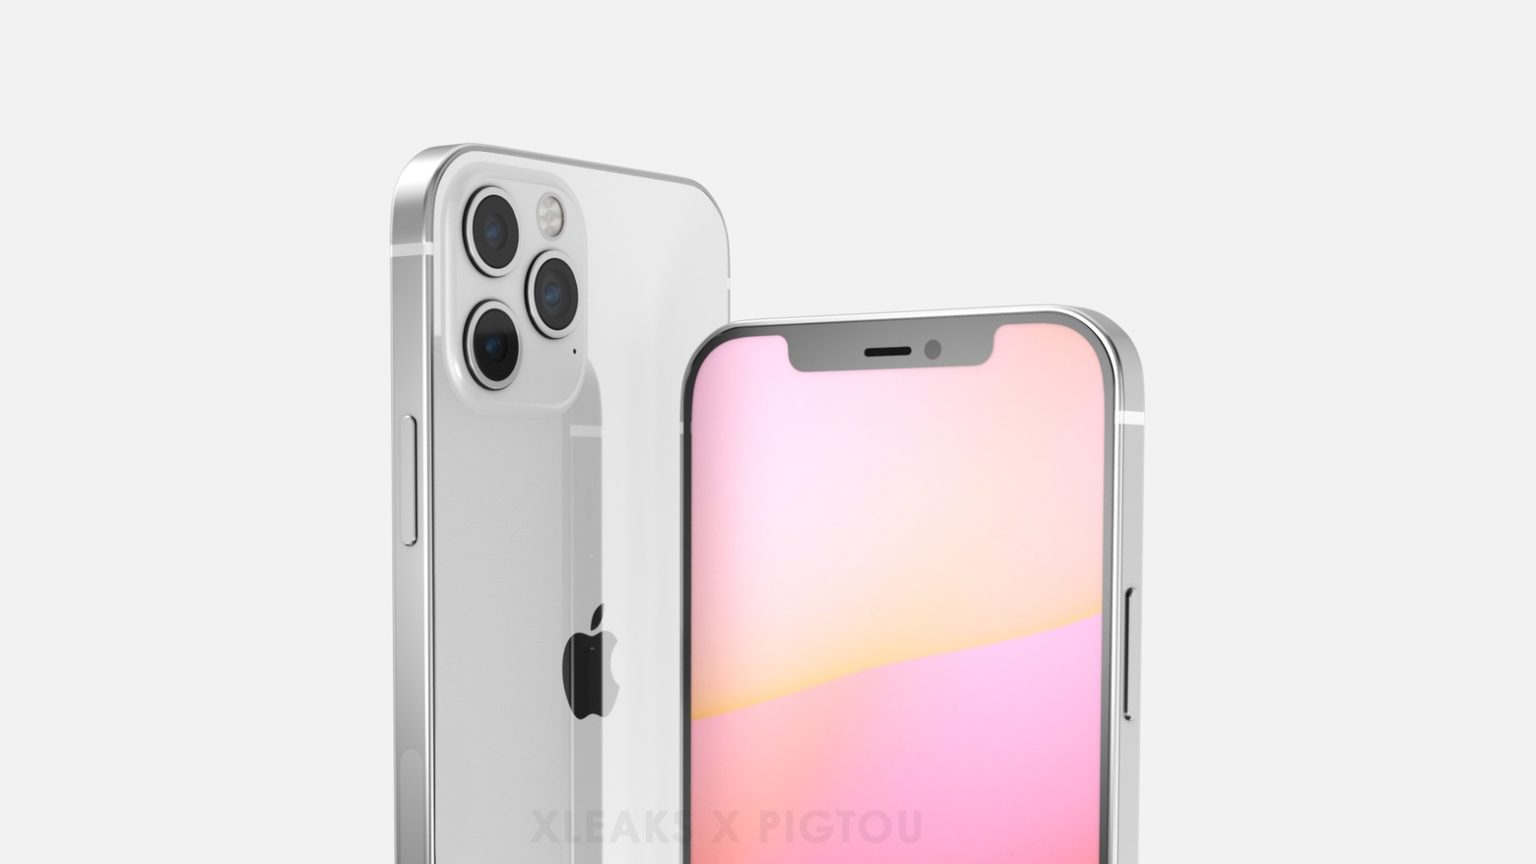 Render shows iPhone 12 camera with three lenses